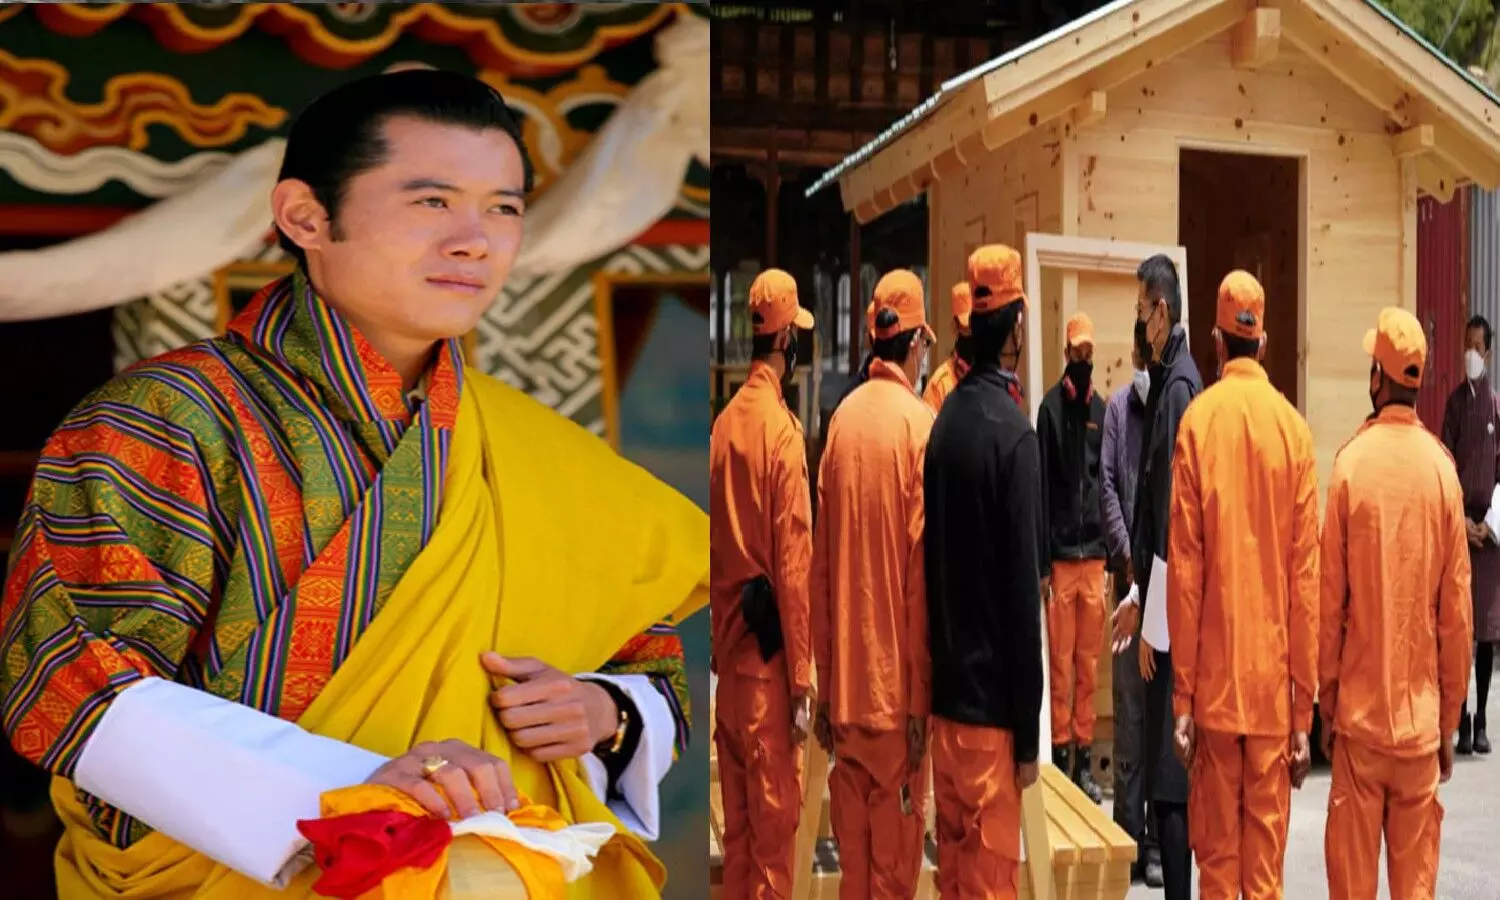 Emperor Jigme Khesar Namgyal also walks through the Wangchuck mountains and dense forests